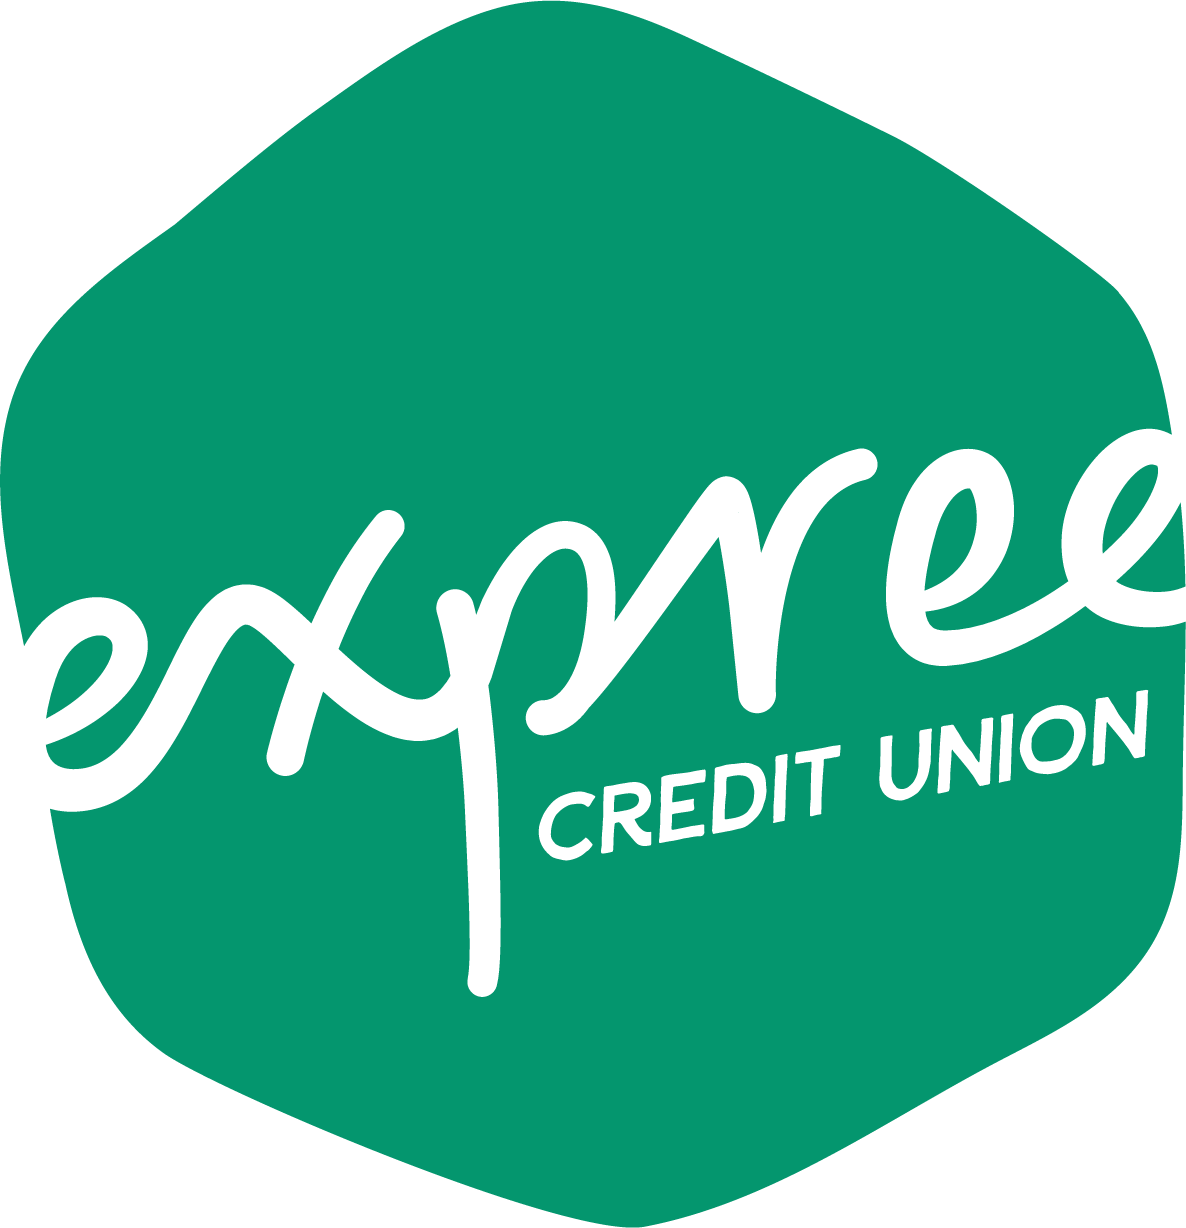 Sponsored by Expree Credit Union